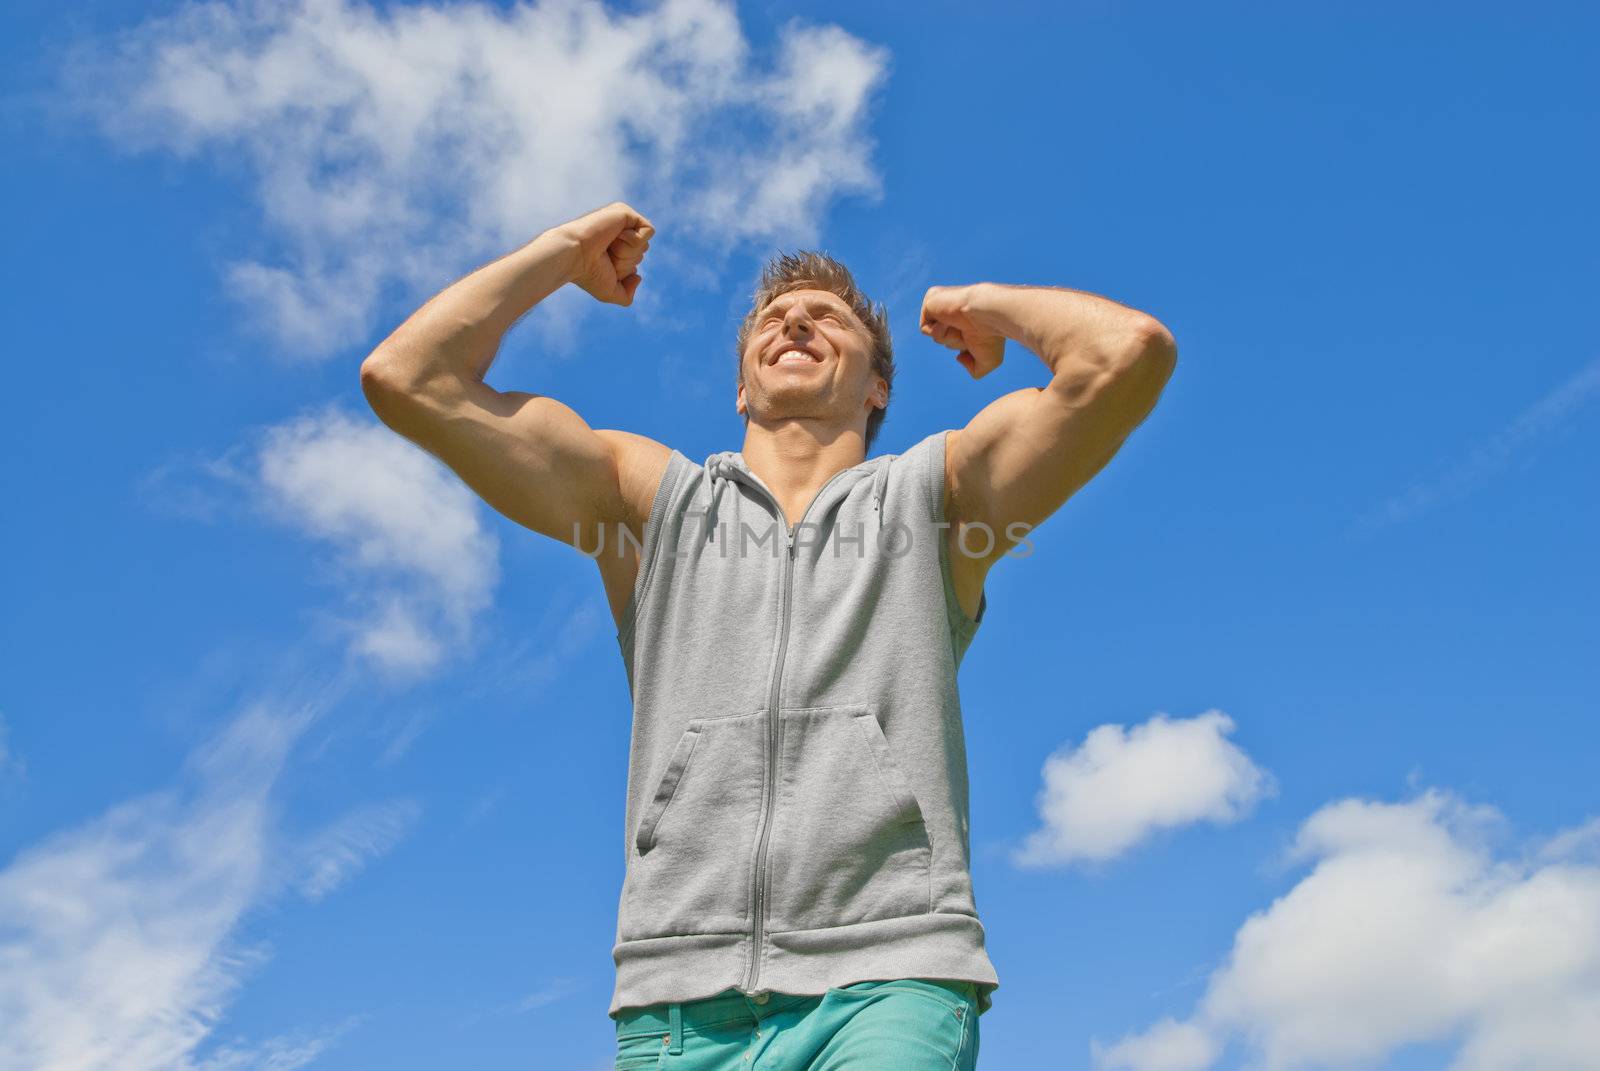 Energetic and happy young man on blue sky background.